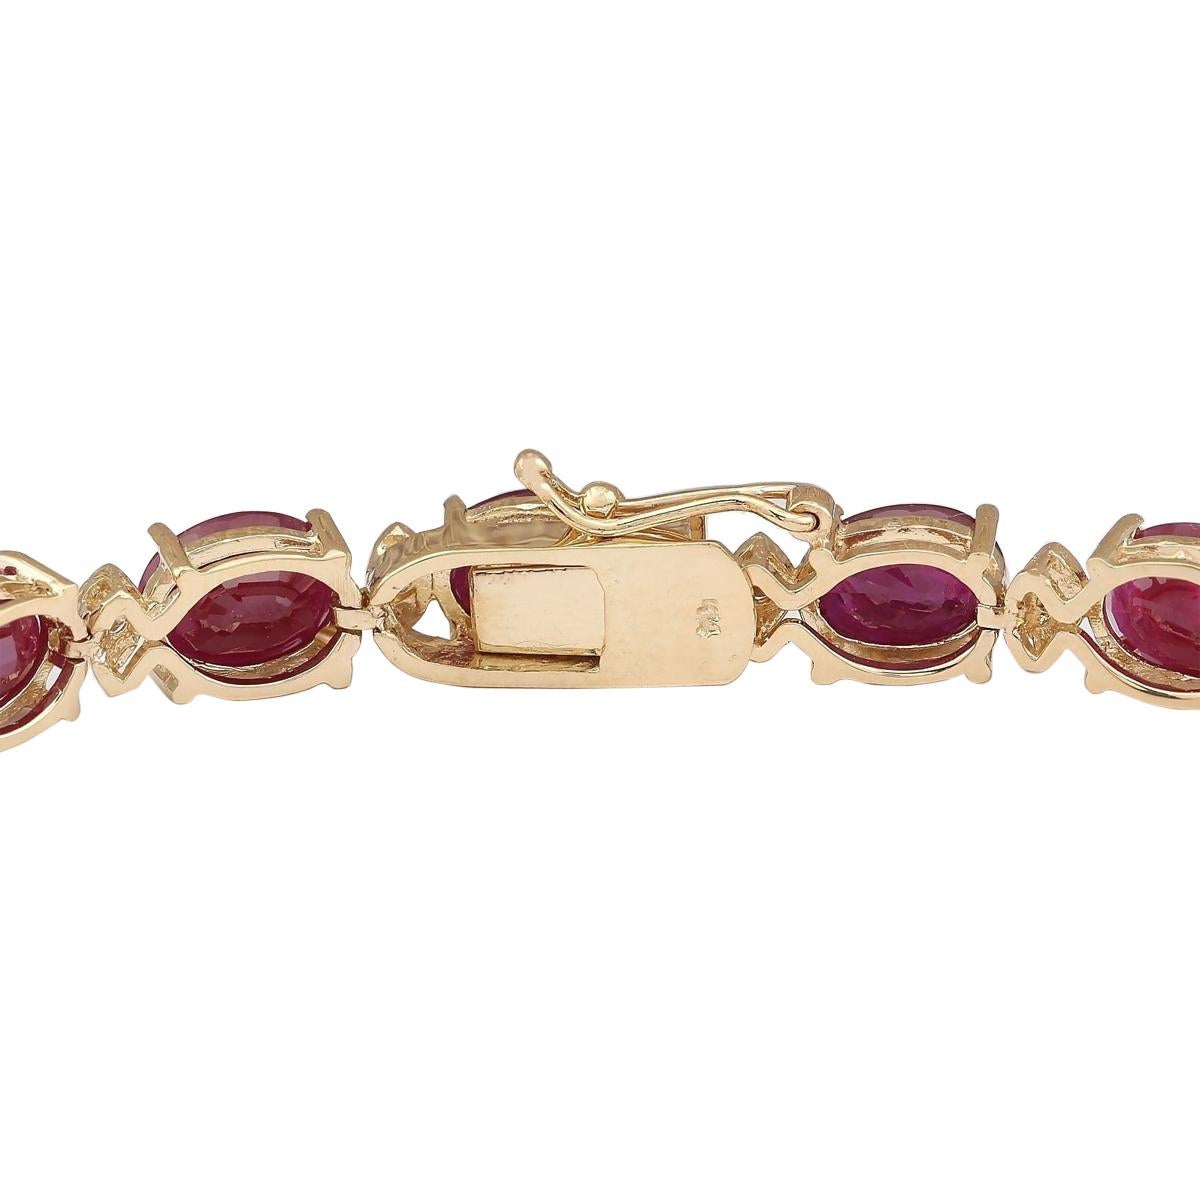 Adorn your wrist with sheer opulence with our 14 Karat Yellow Gold Diamond Bracelet, featuring a dazzling 28.58 Carat Ruby centerpiece, delicately set alongside sparkling diamonds totaling 0.80 Carat. Crafted to perfection and stamped with 14K, this